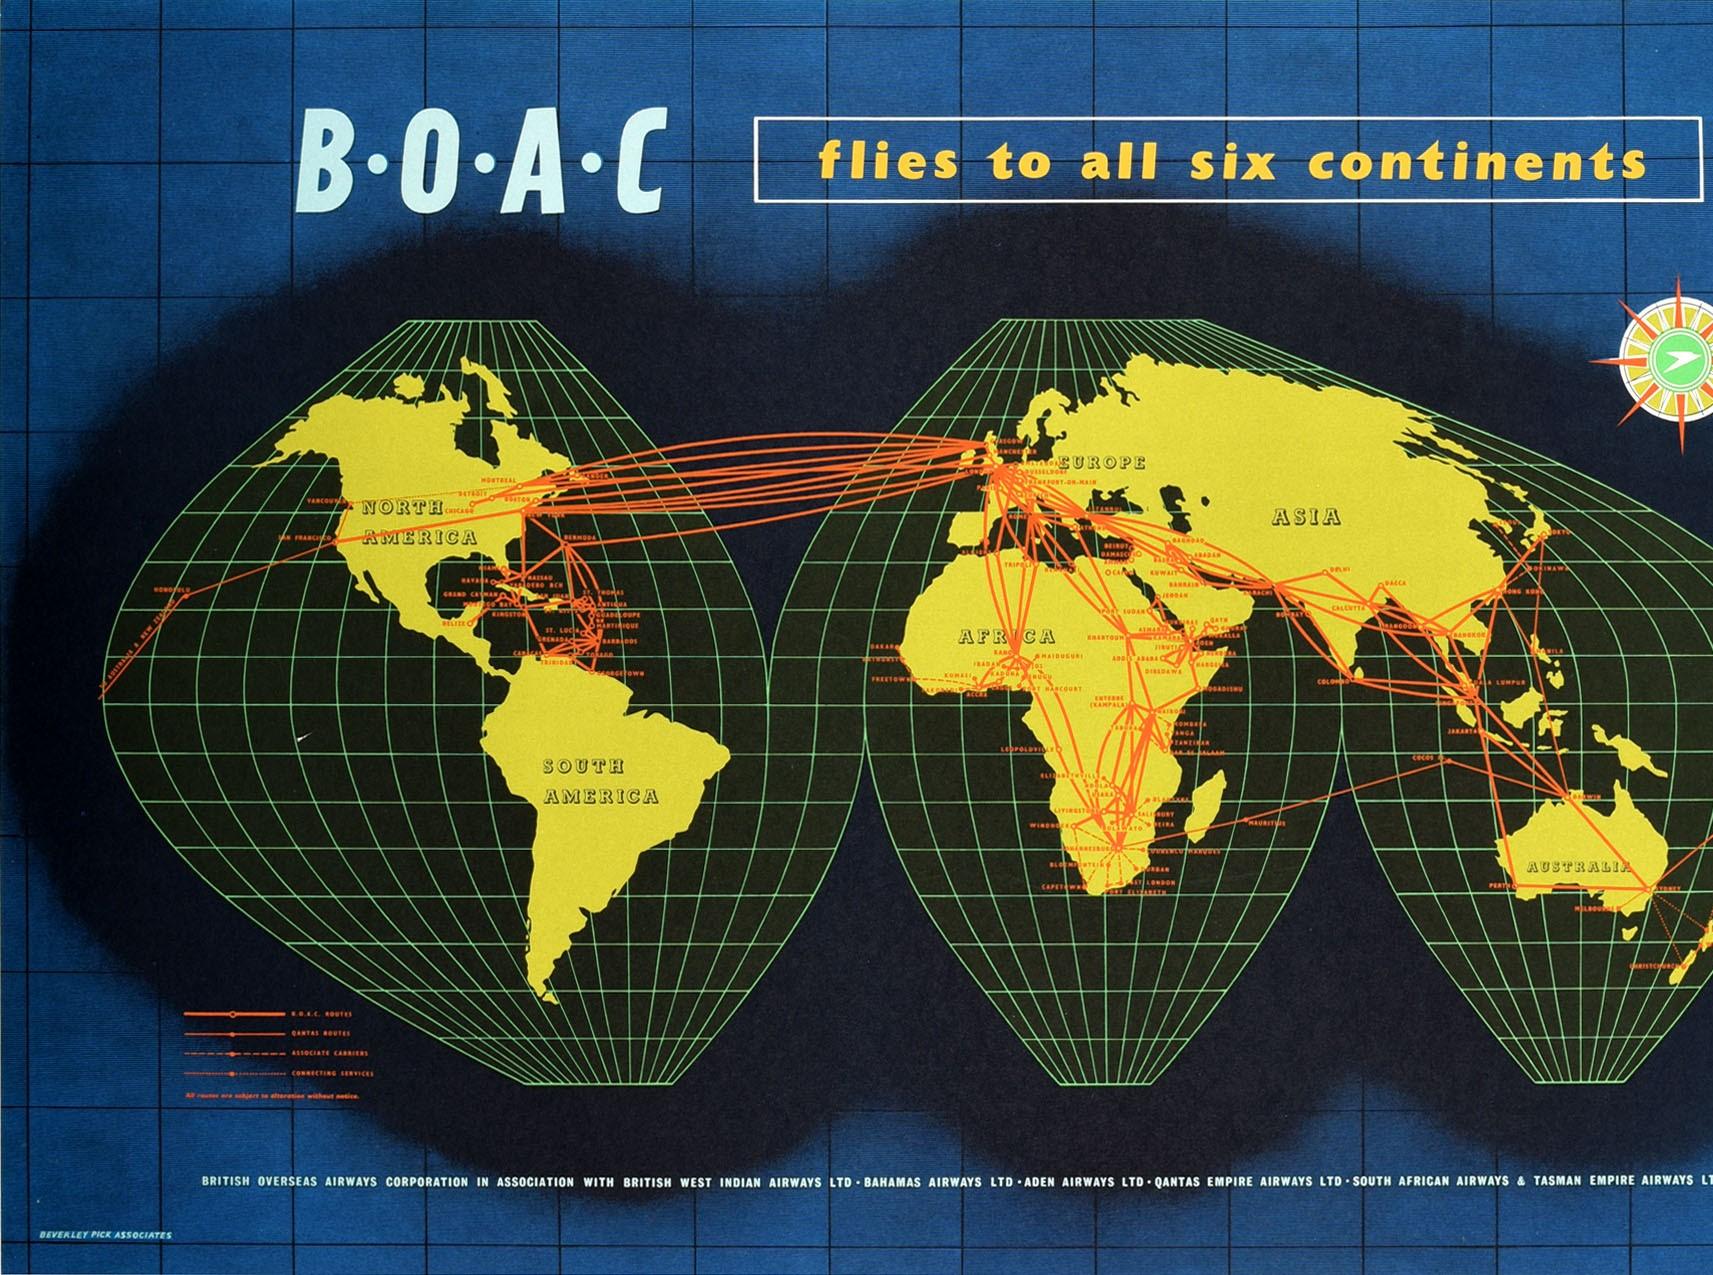 Original vintage British Overseas Airways Corporation travel advertising poster - BOAC Flies To All Six Continents - featuring a planisphere map of the world against a dark blue background with the speedbird logo inside a compass point below the